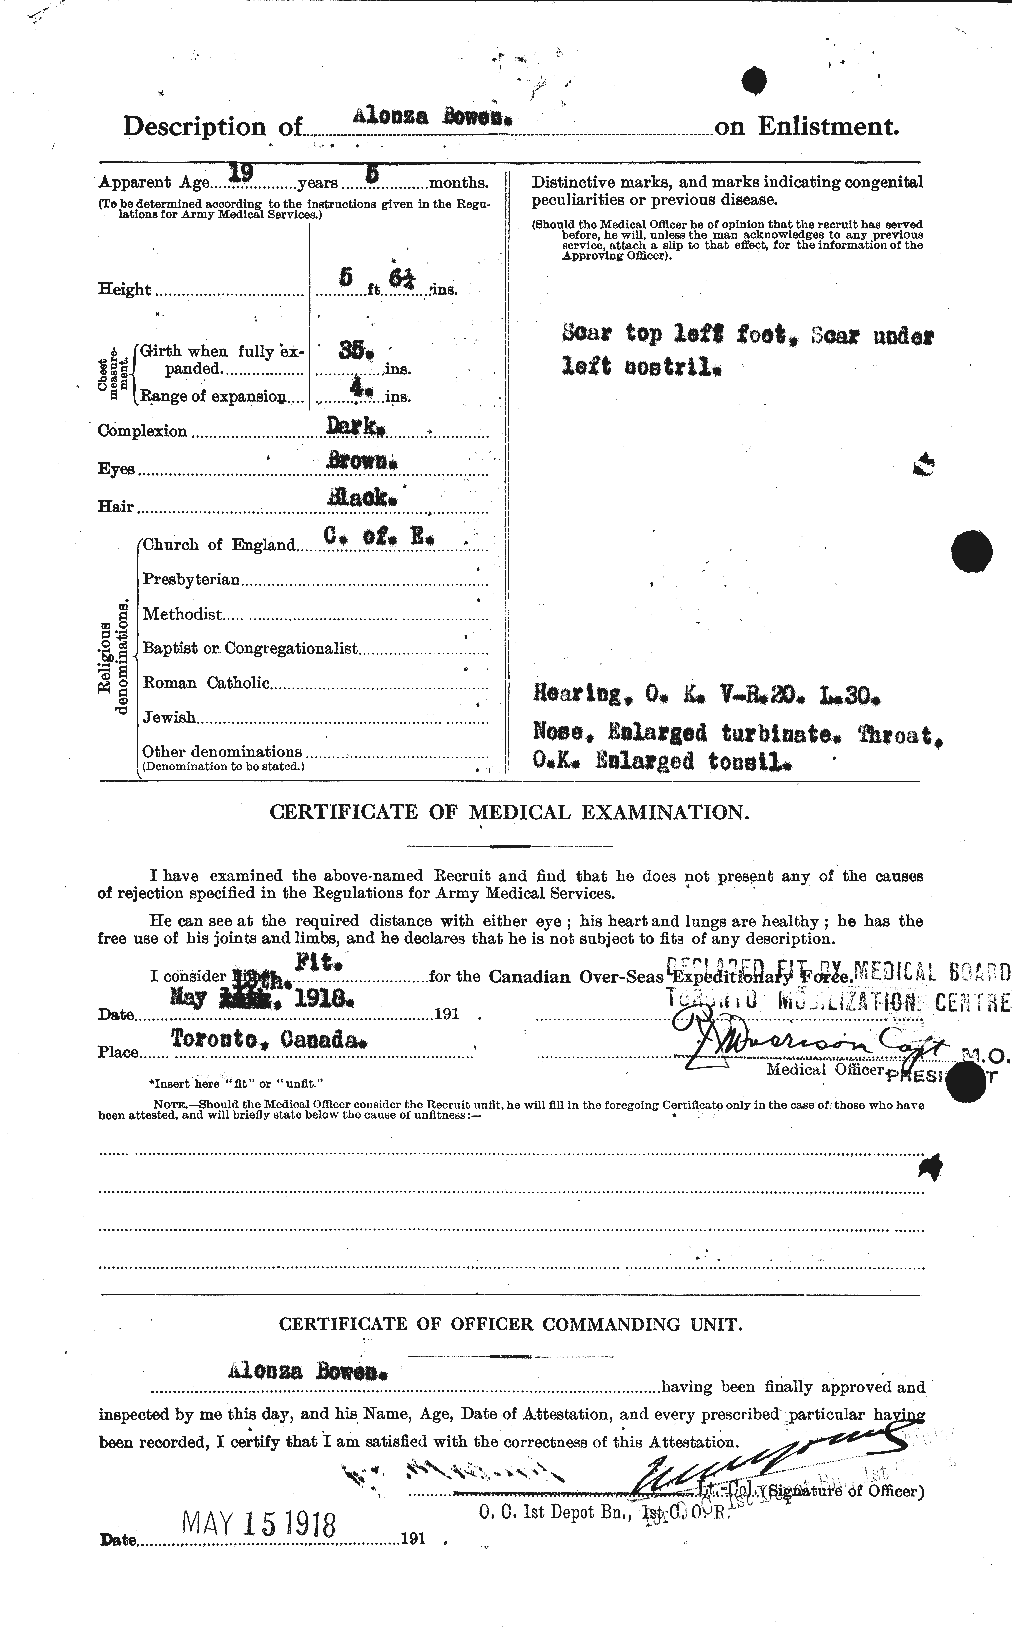 Personnel Records of the First World War - CEF 255350b